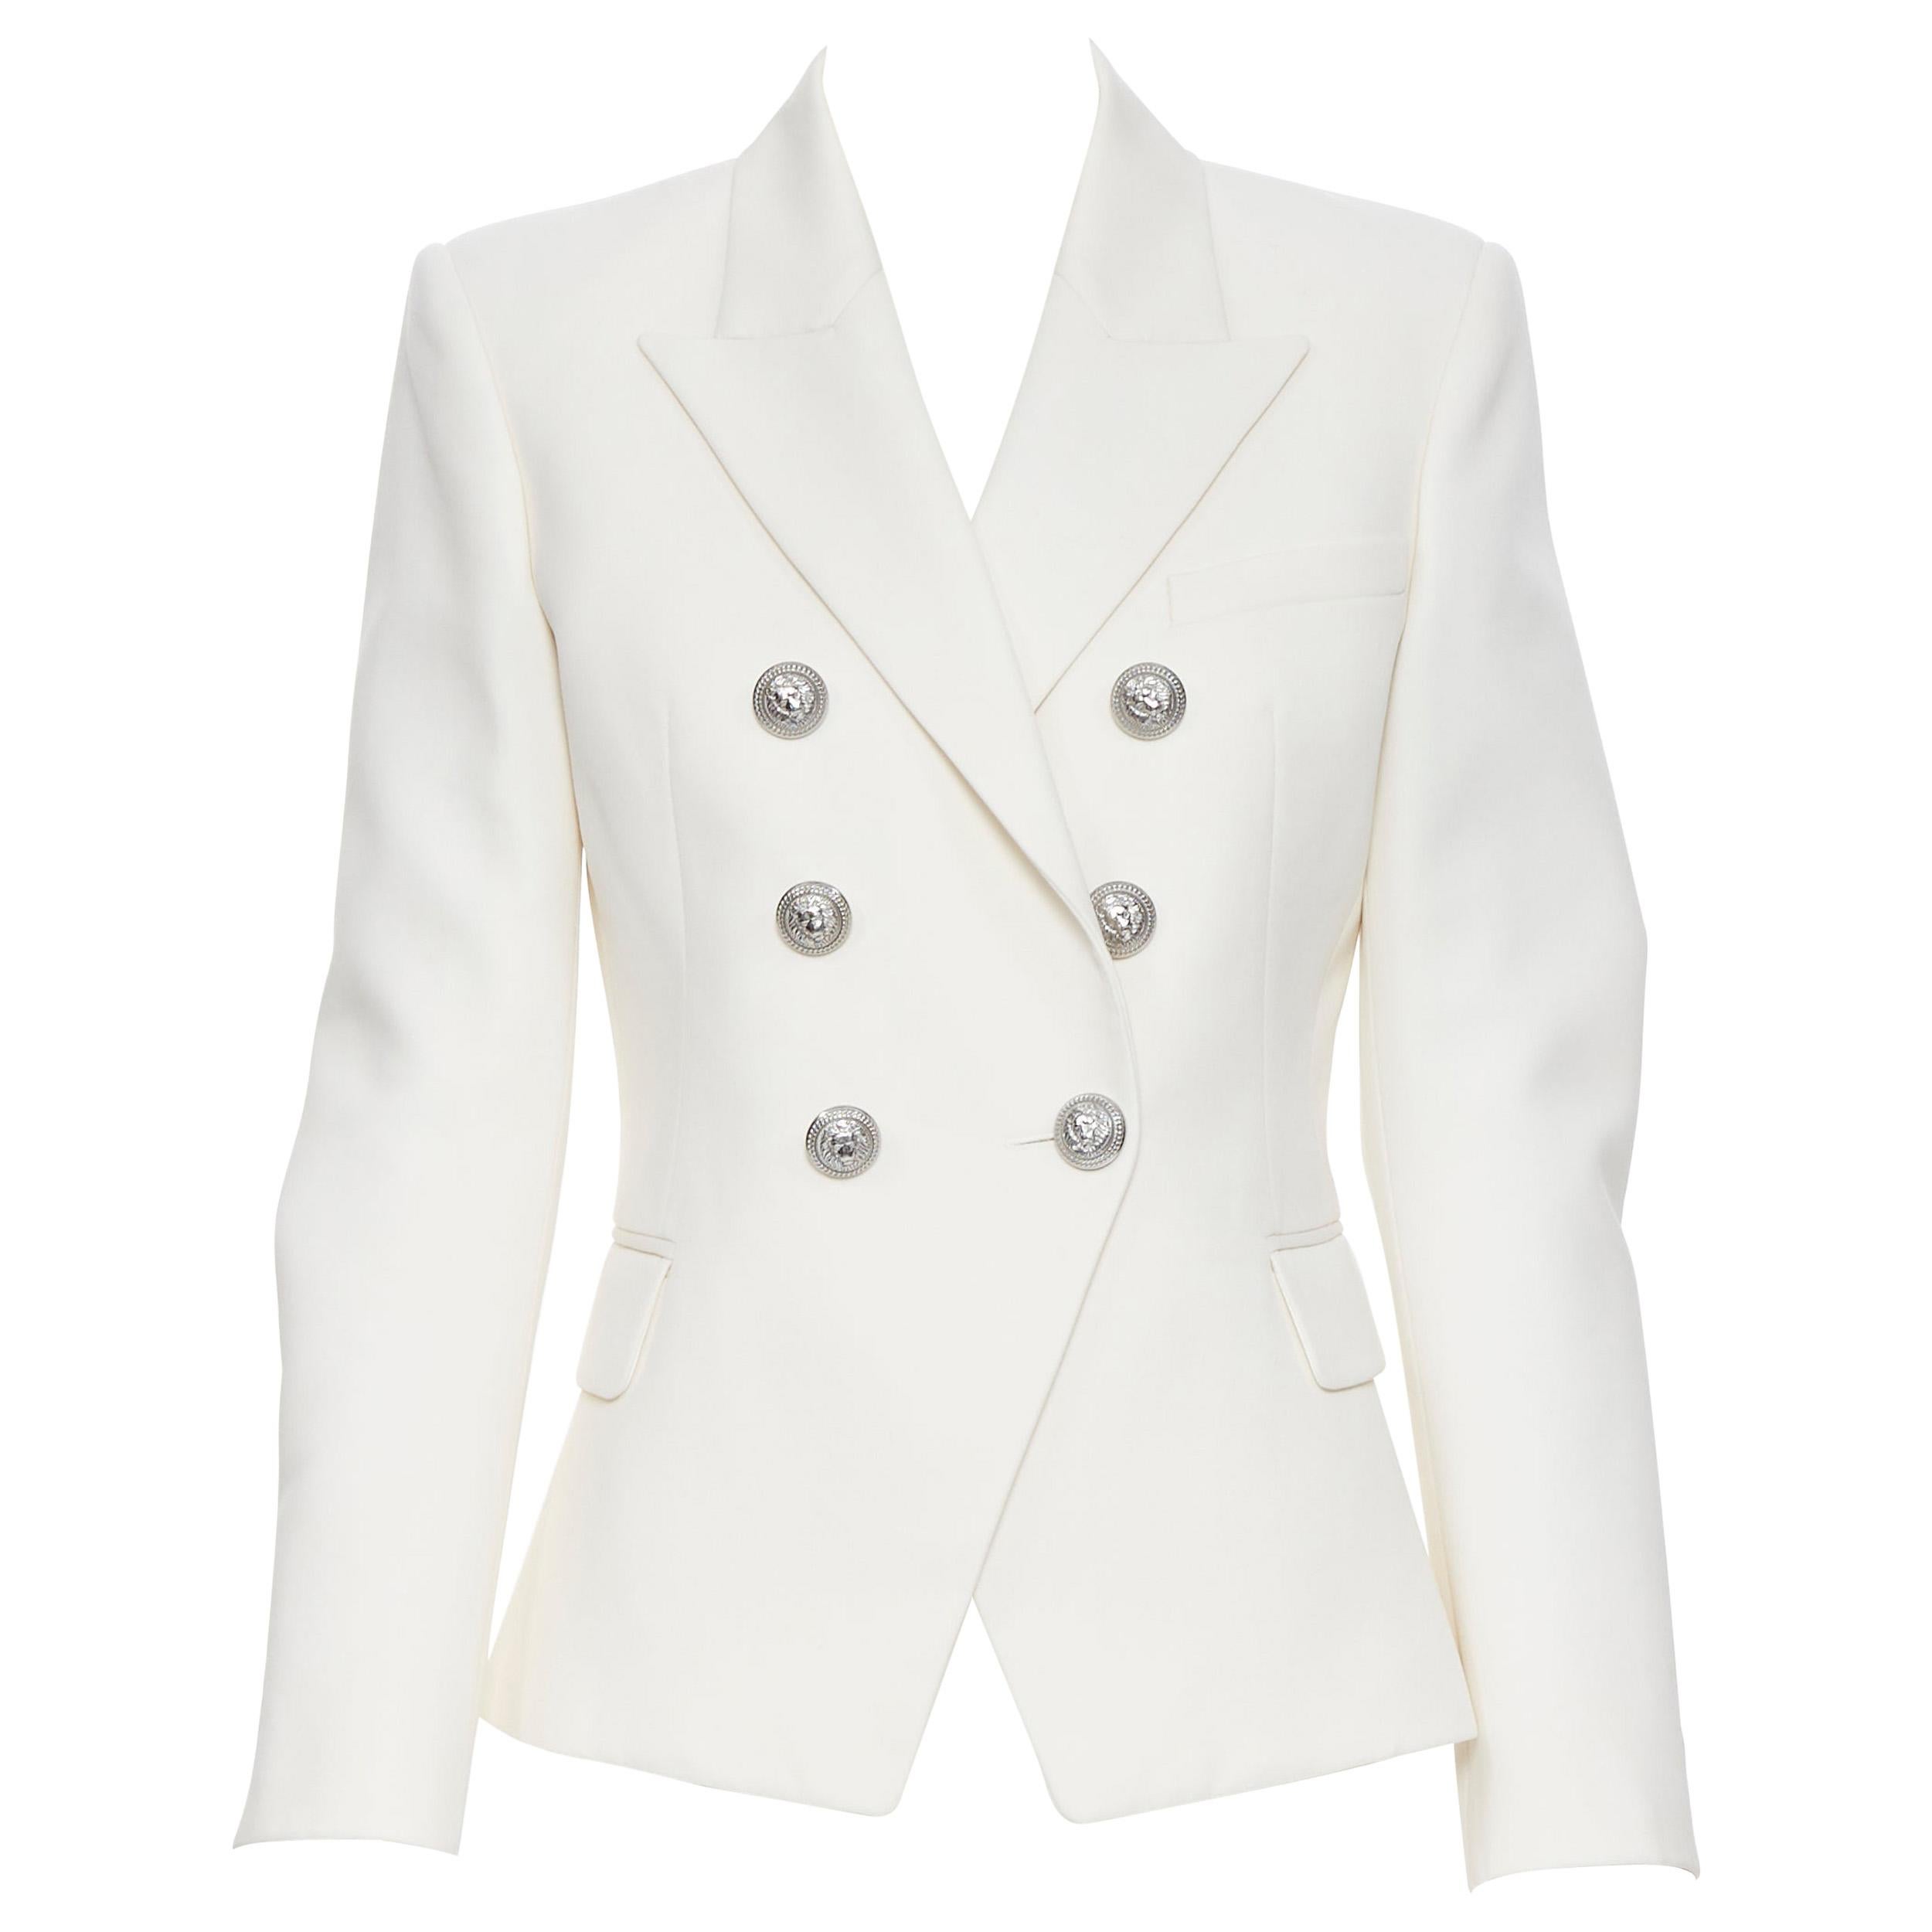 new BALMAIN 100% wool white silver button double breasted blazer jacket FR38 M